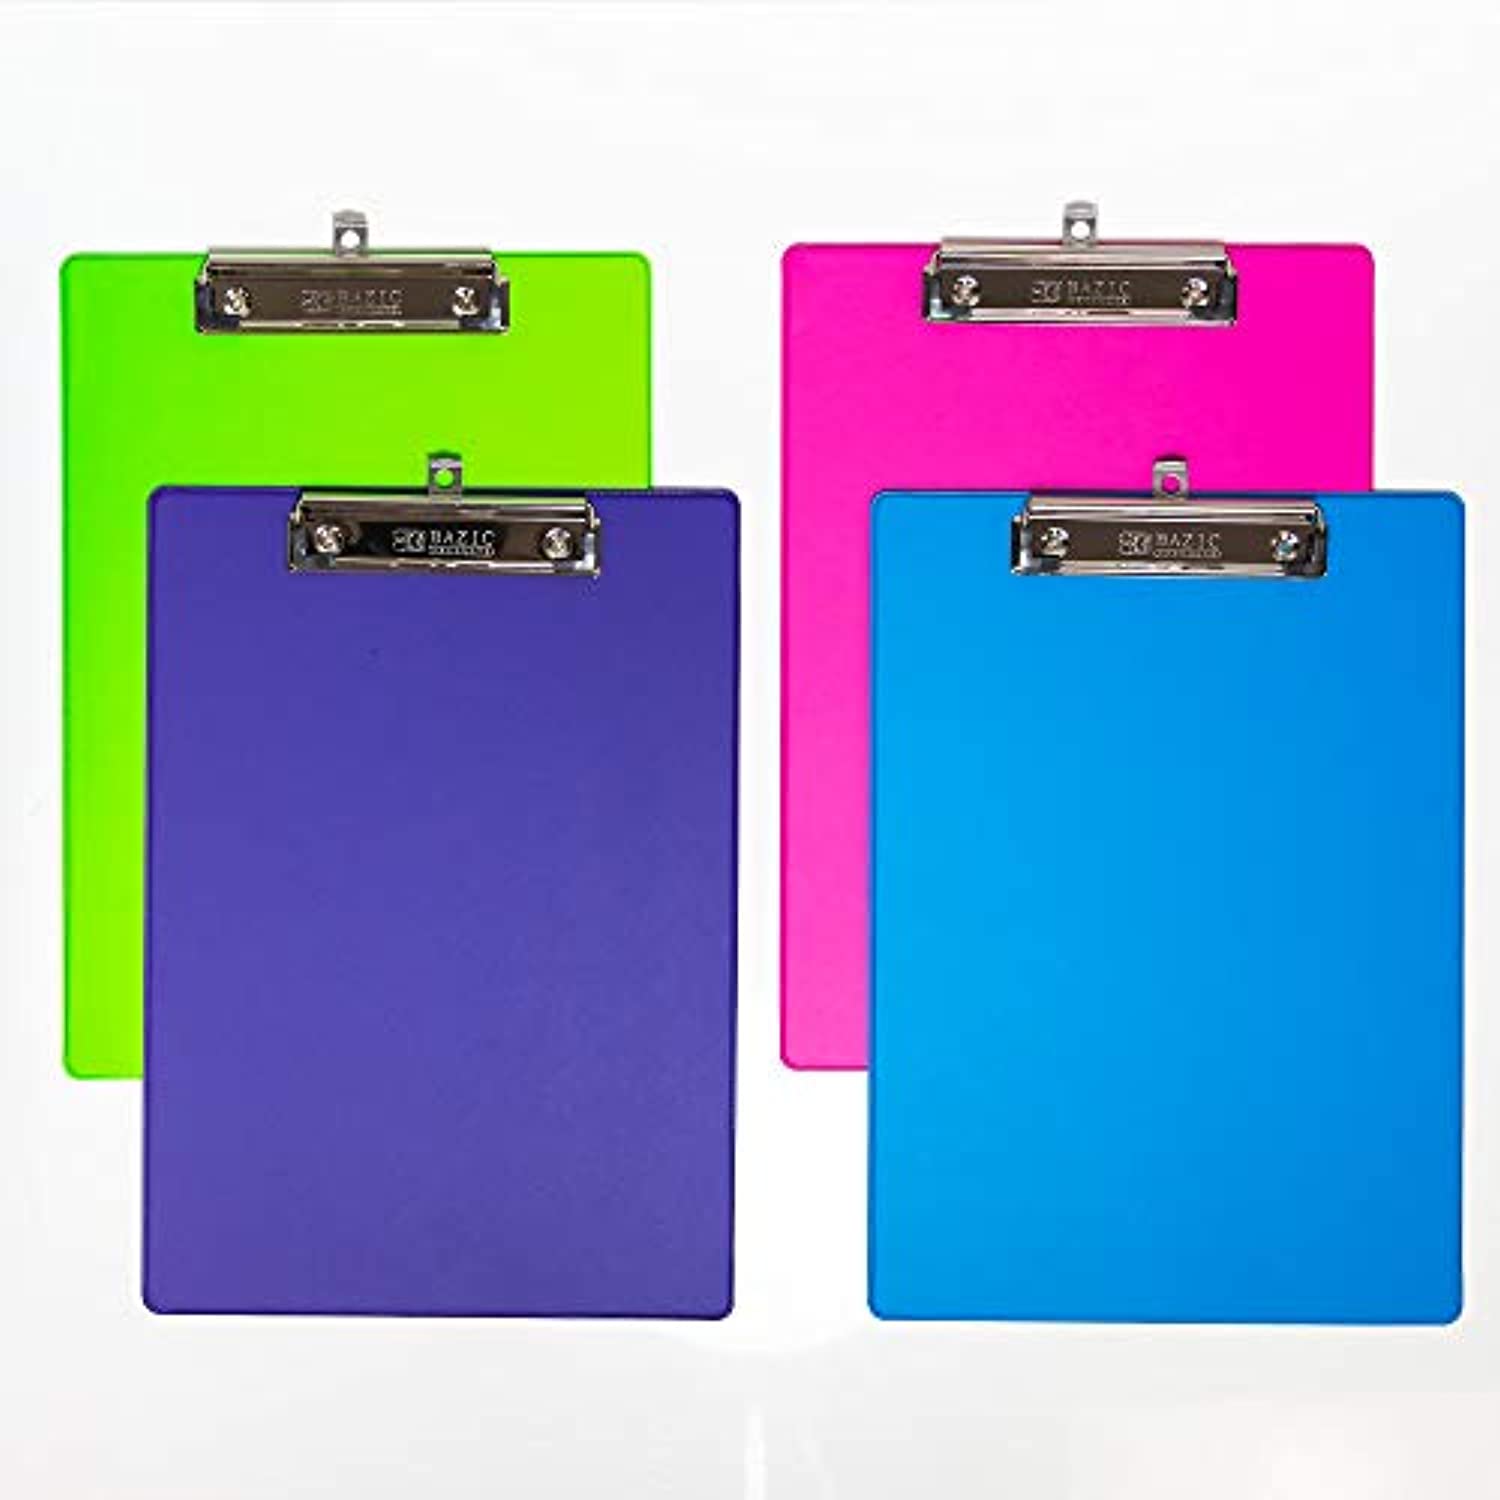 Bright Color PVC Standard Clipboard Low Profile Clip, A4 Letter Size, Business Office School Teacher Student College, Assorted 4 Colors, 4-Pack.